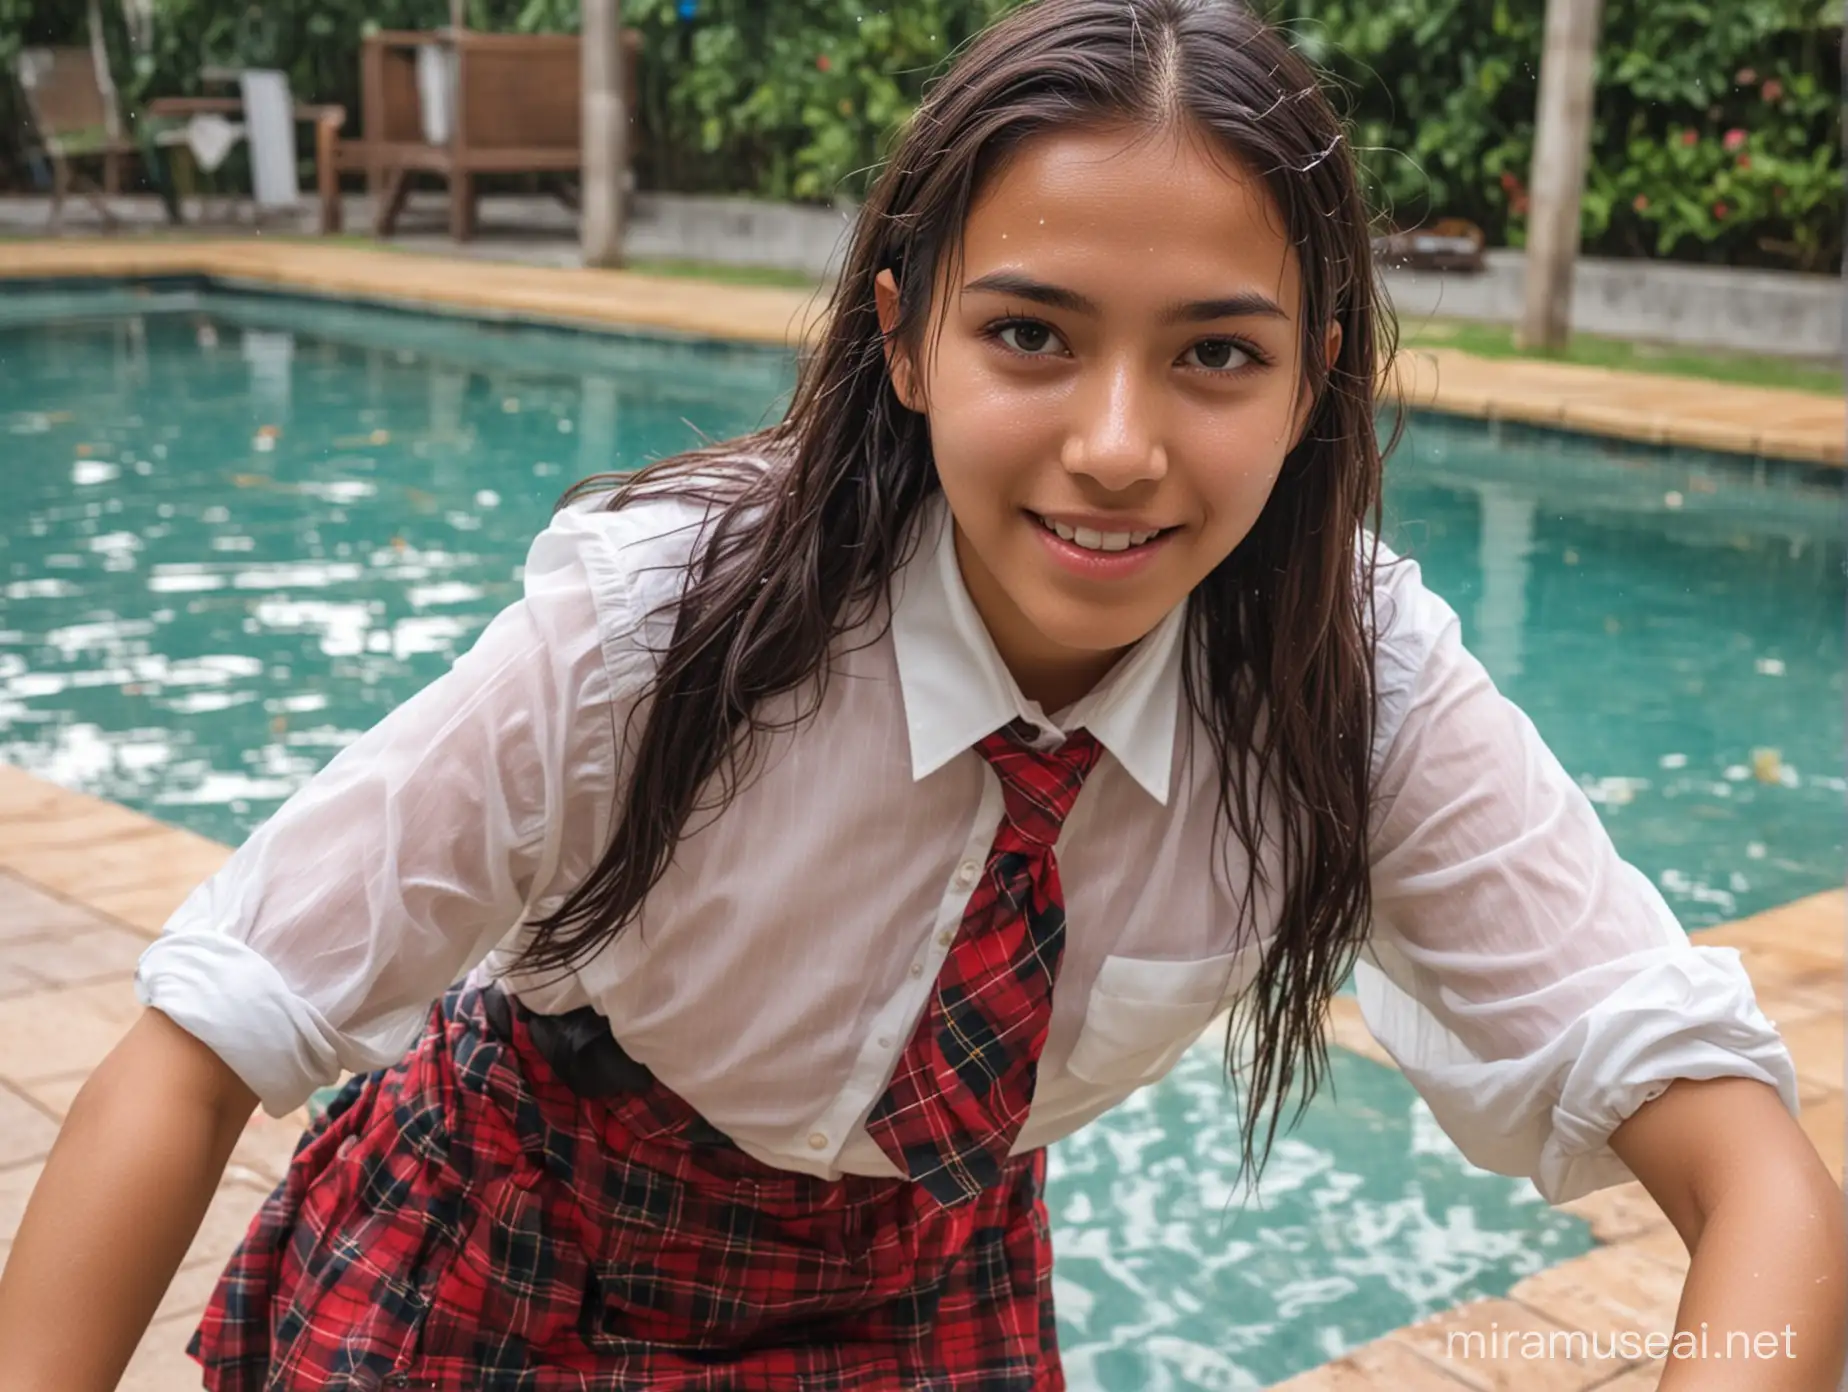 15 years old woman - indonesian, flat-chested, makeup, tight buttoned white sheer blouse tucked into red plaid tight fit skirt - soaking diaphanous wet, necktie, wearing a backpack, out from swimming pool, wet face, wet clothes, wet body, limp wet hair, goofy expression, selfie